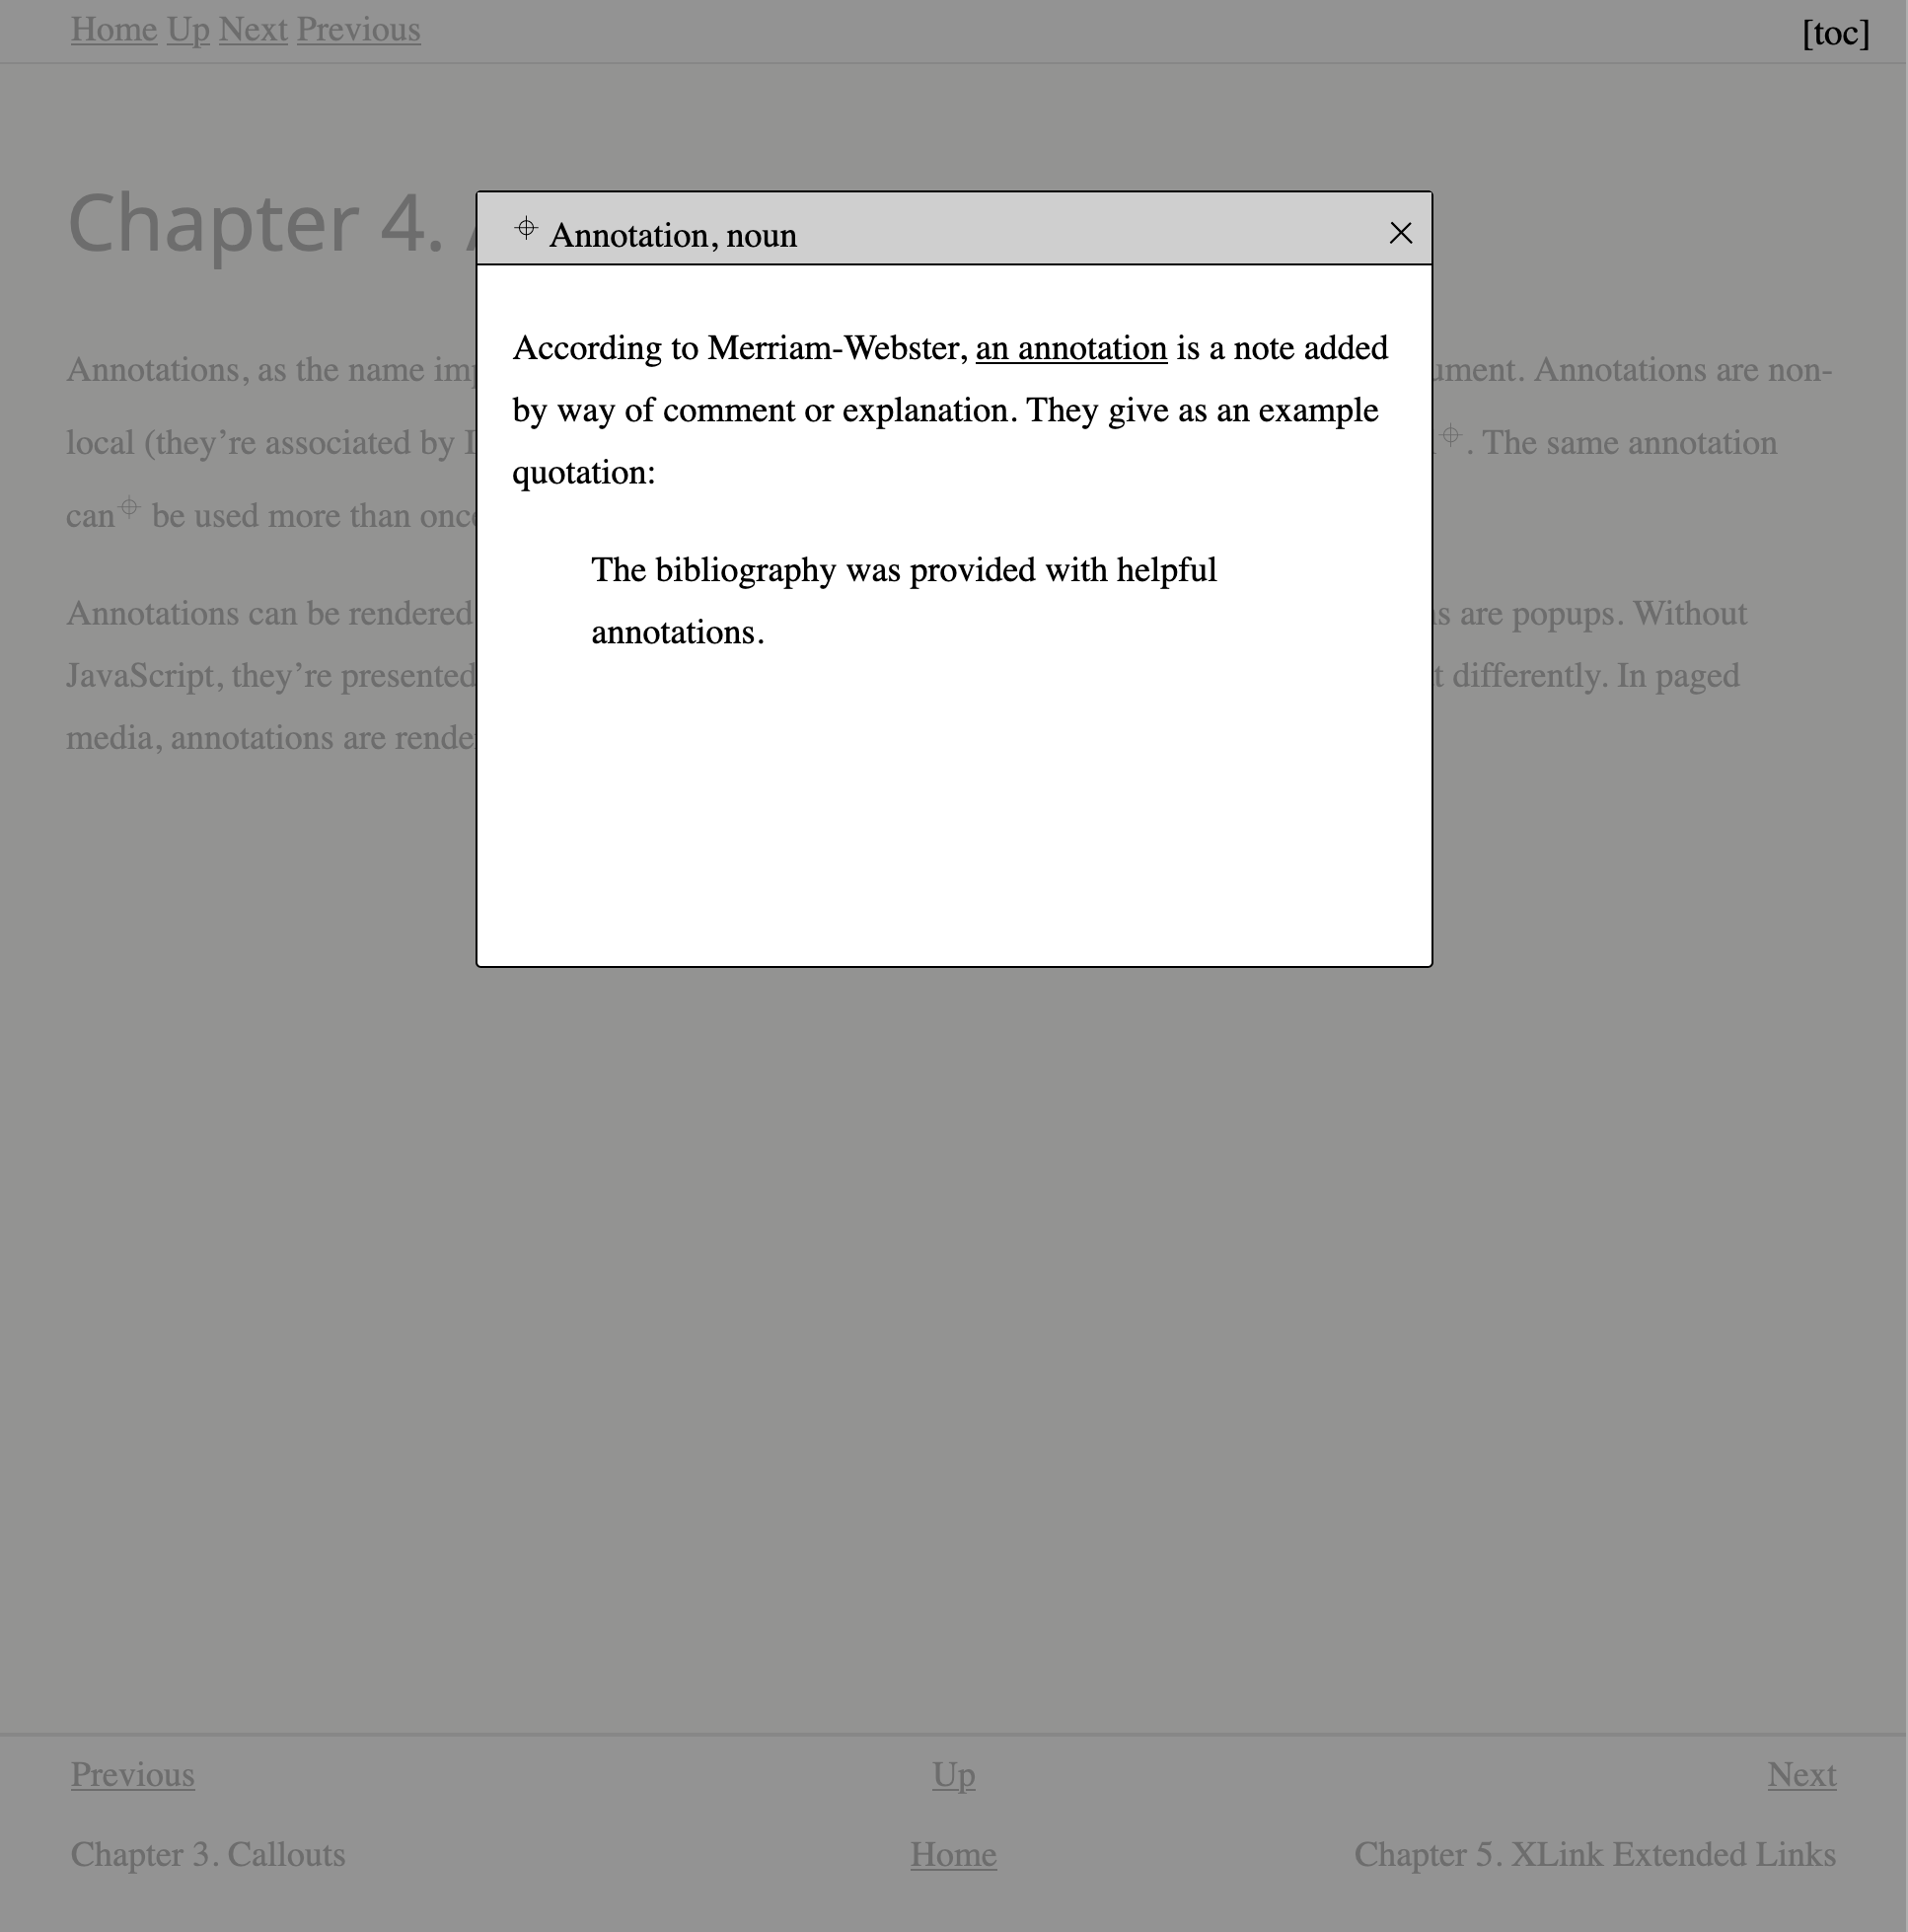 Screenshot of a rendered DocBook chapter.